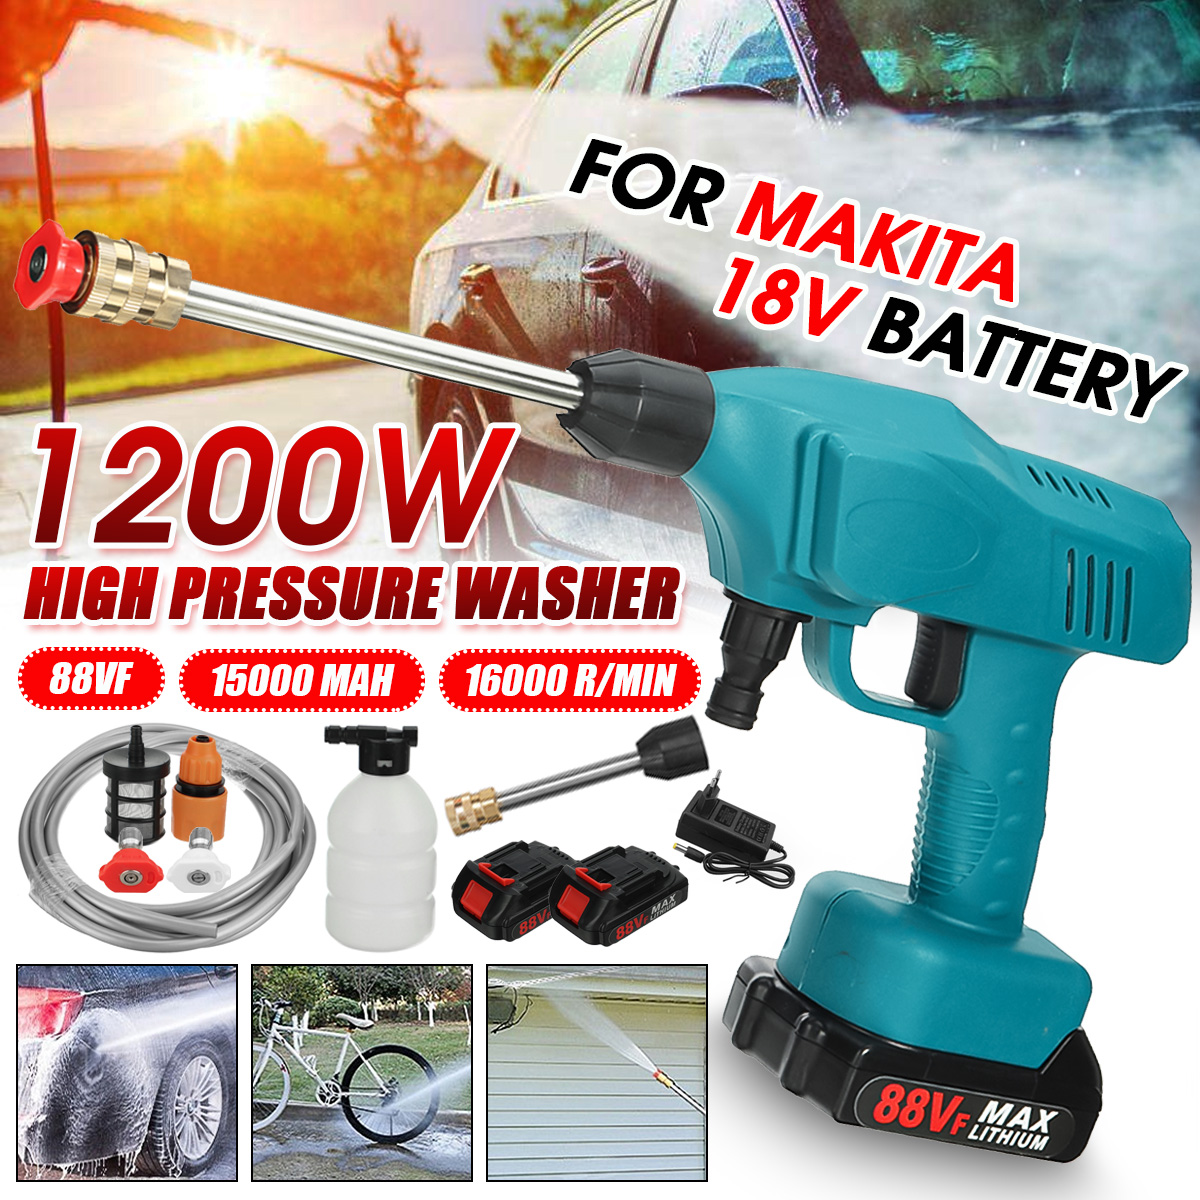 1200W-88VF-Portable-Cordless-Car-Washer-High-Pressure-Car-Household-Washer-Cleaner-Guns-Pumps-Tool-F-1891057-2